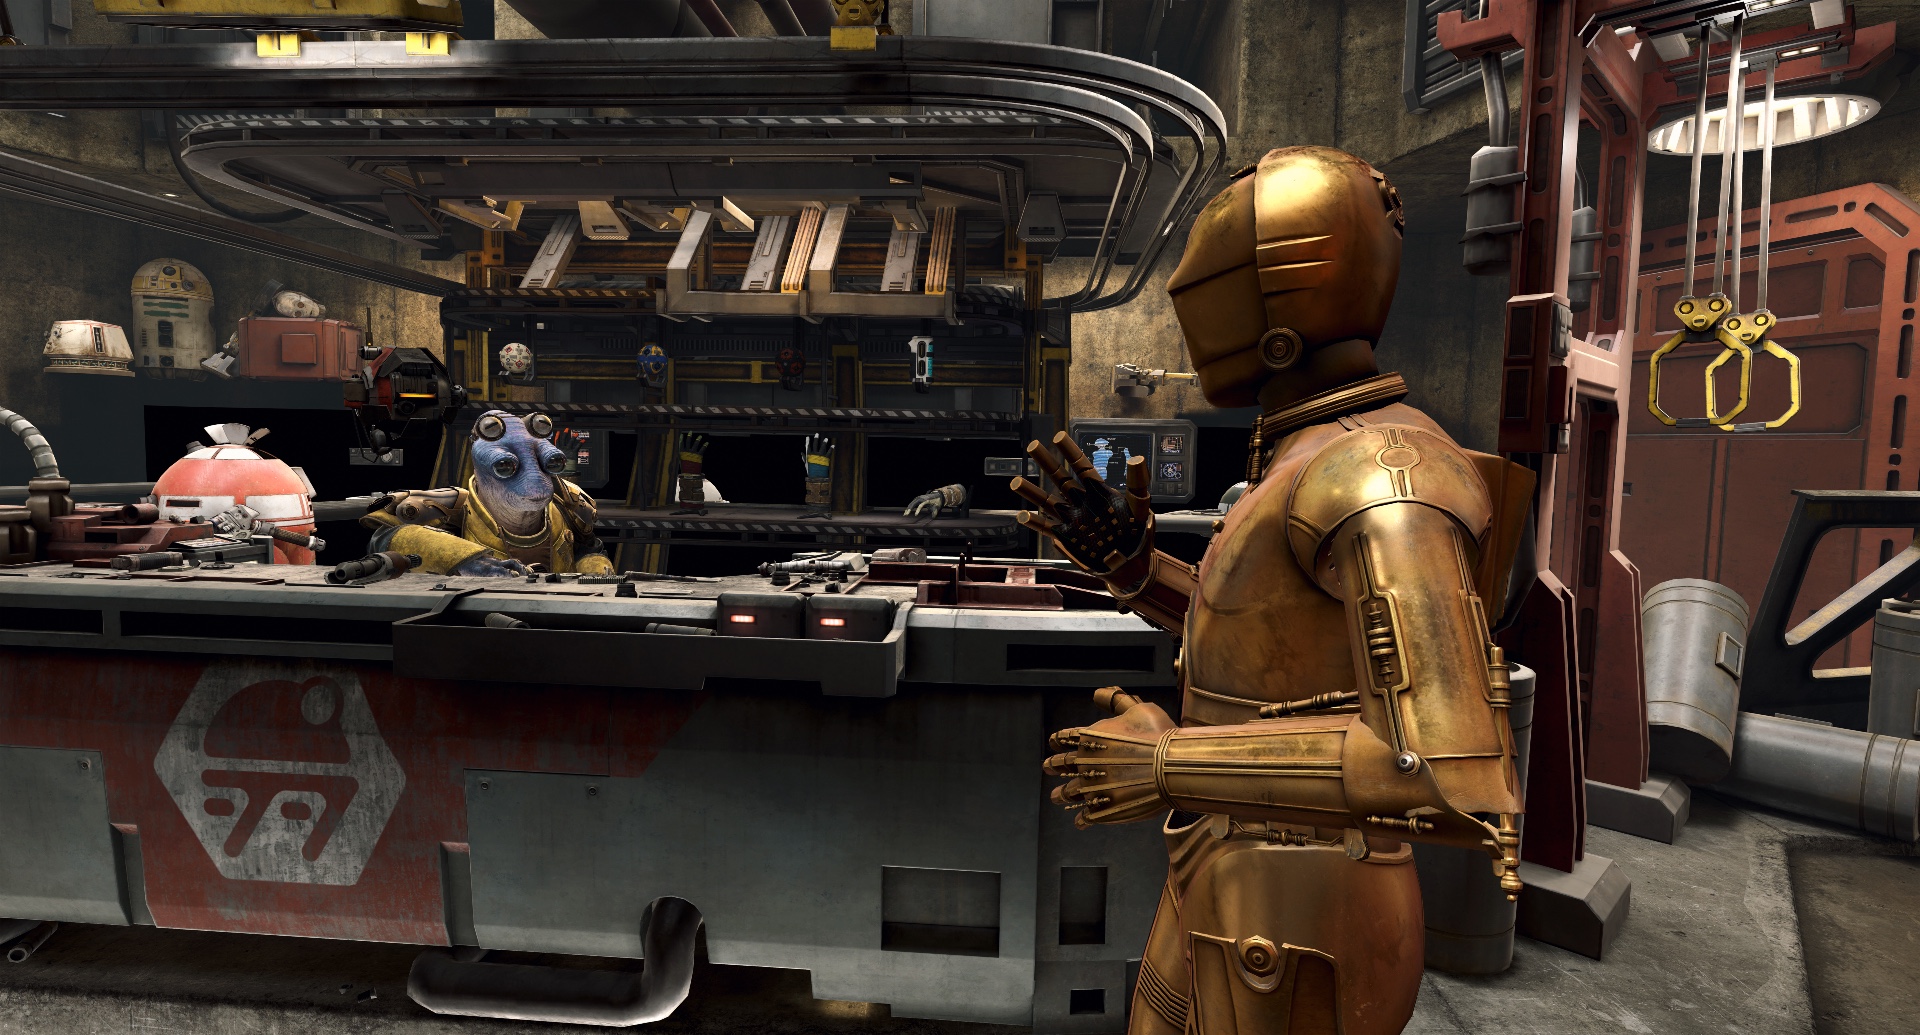 Mubo's Workshop is in the back of the Droid Depot at Galaxy's Ege. (Image: ILMxLAB)